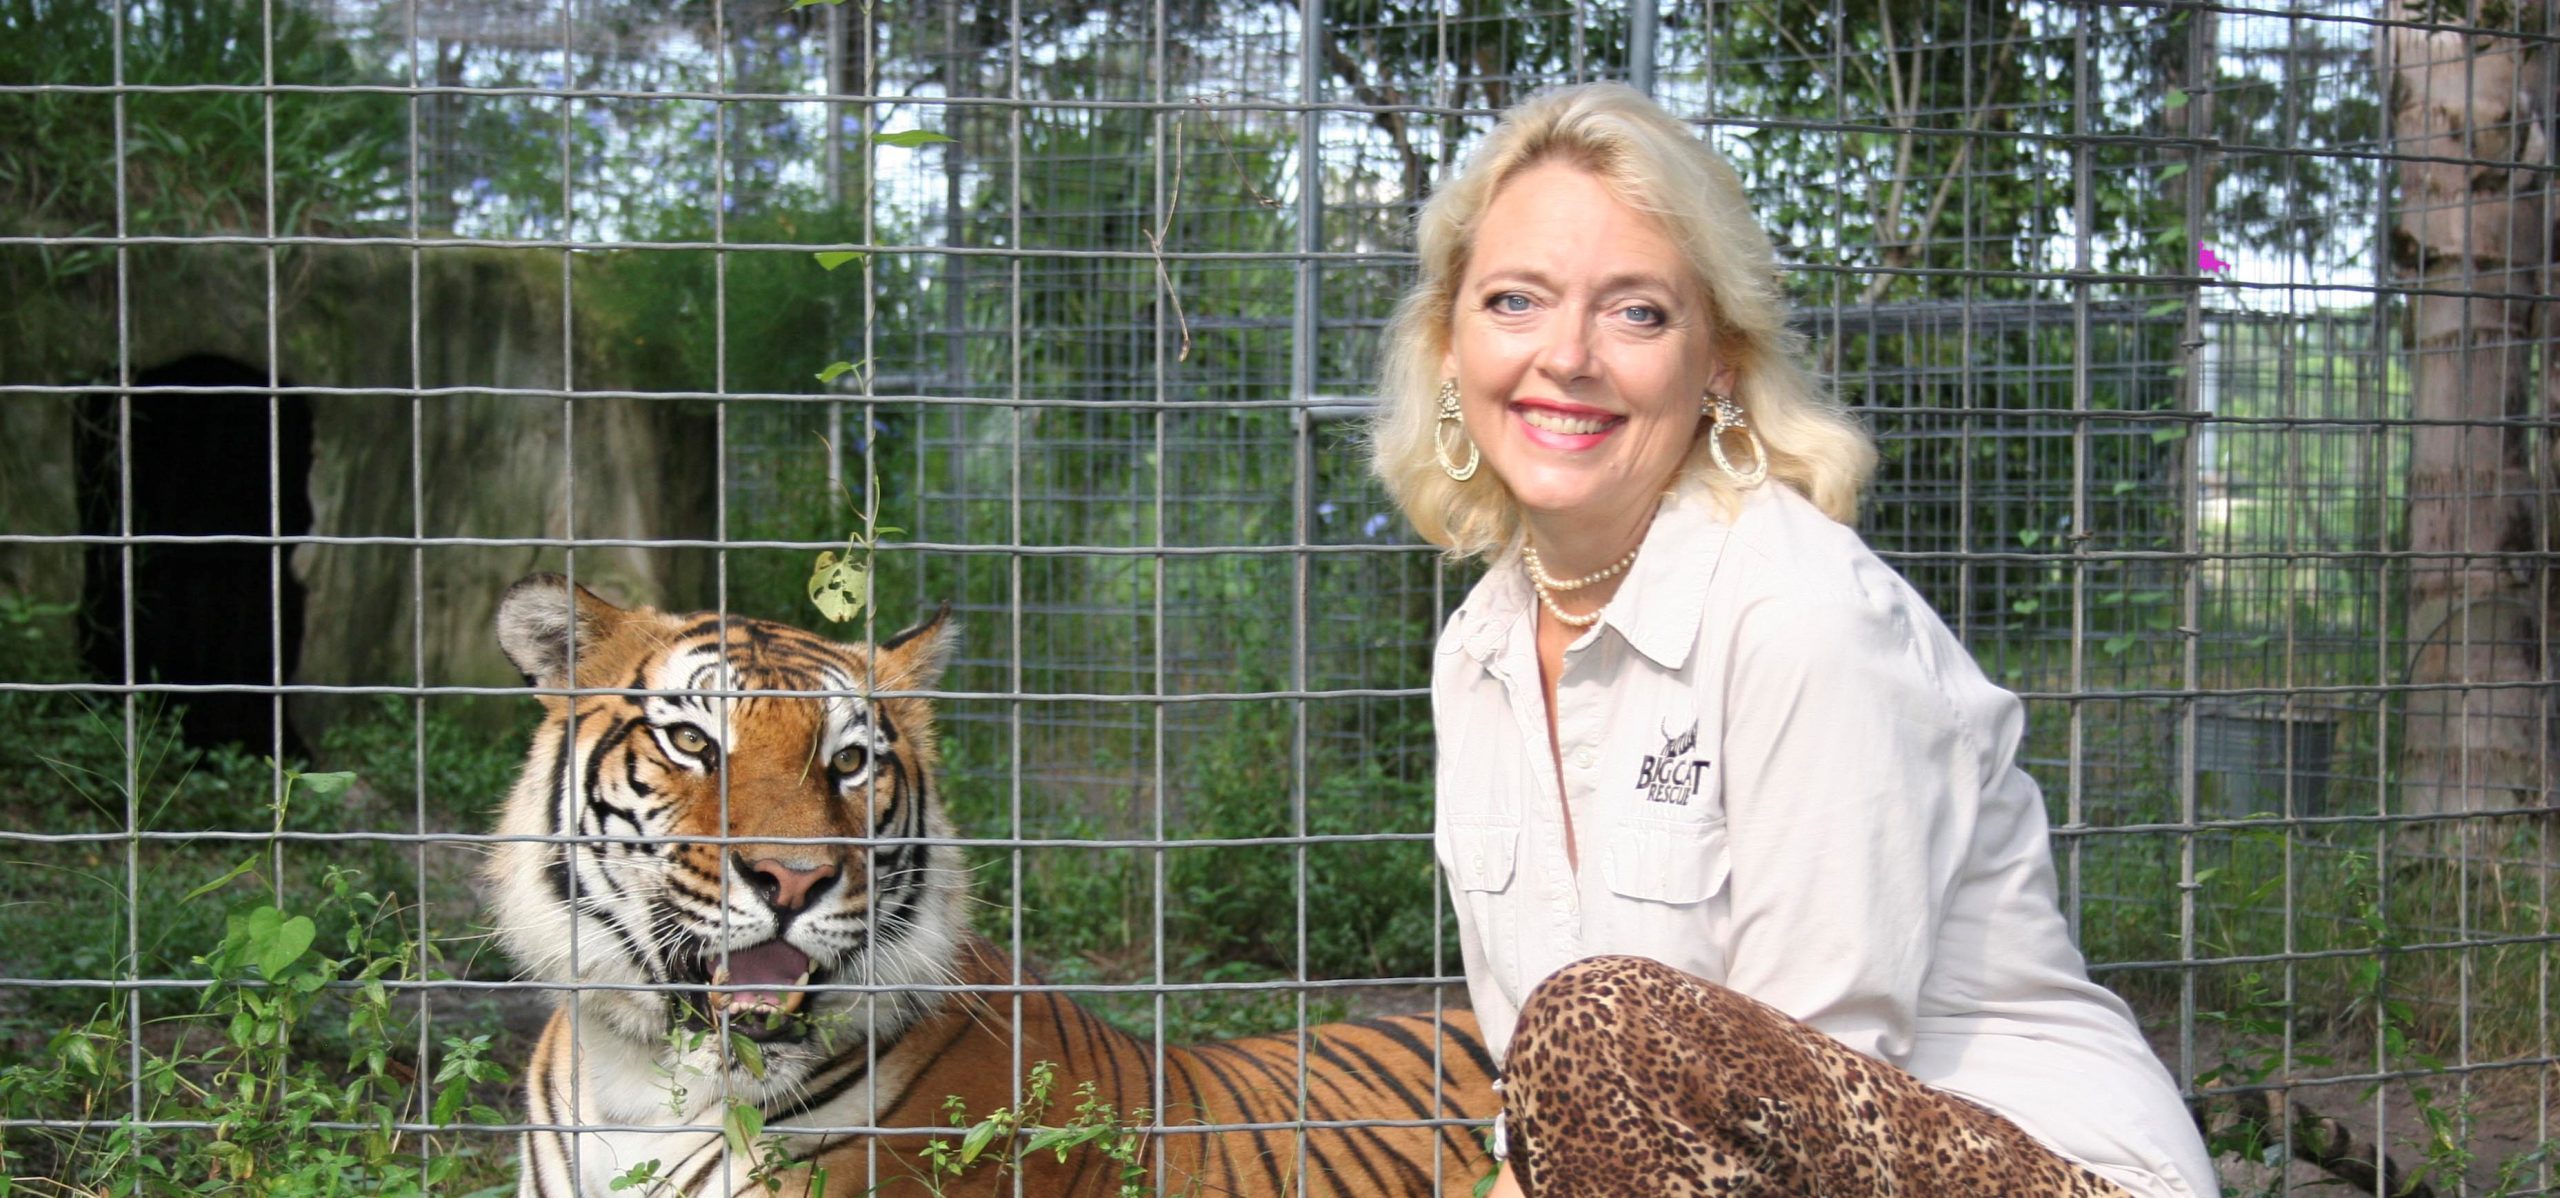 Where Is Carole Baskin Now Big Cat Rescue Owner Today In 2020